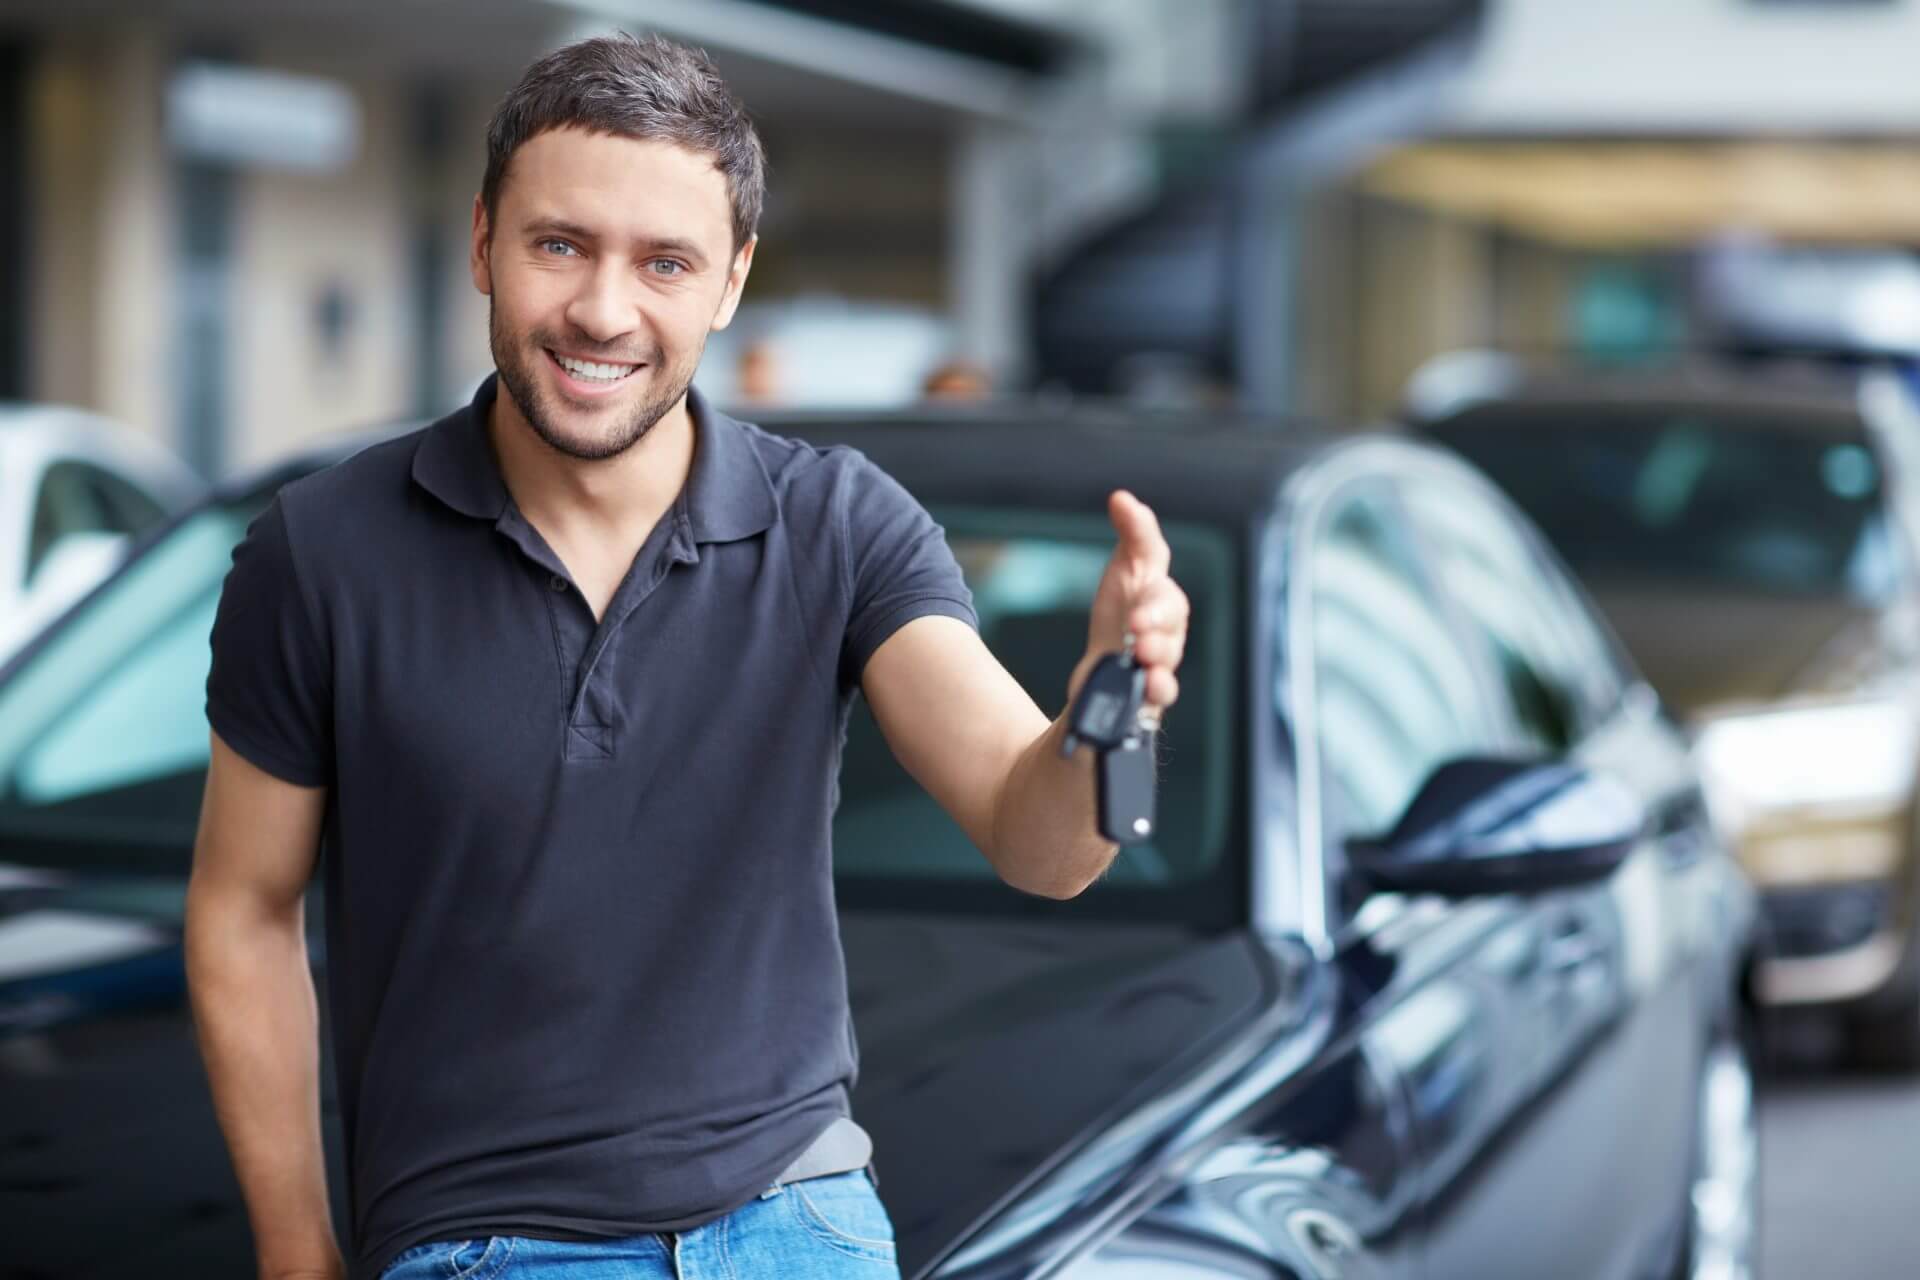 Car Finance Broker – What Should You Know About Vehicle Loans?